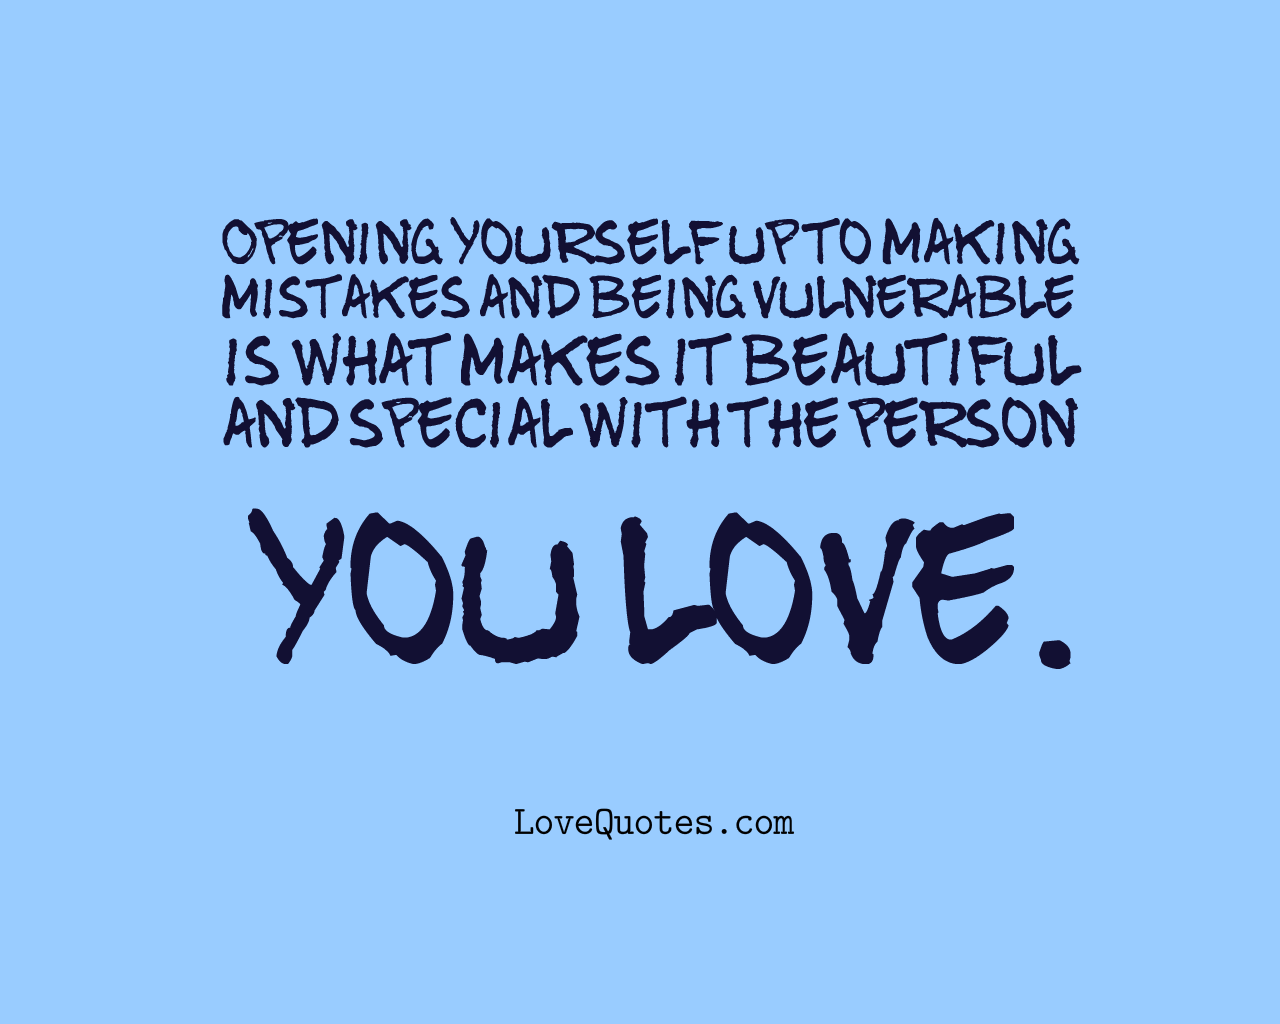 Opening Yourself - Love Quotes